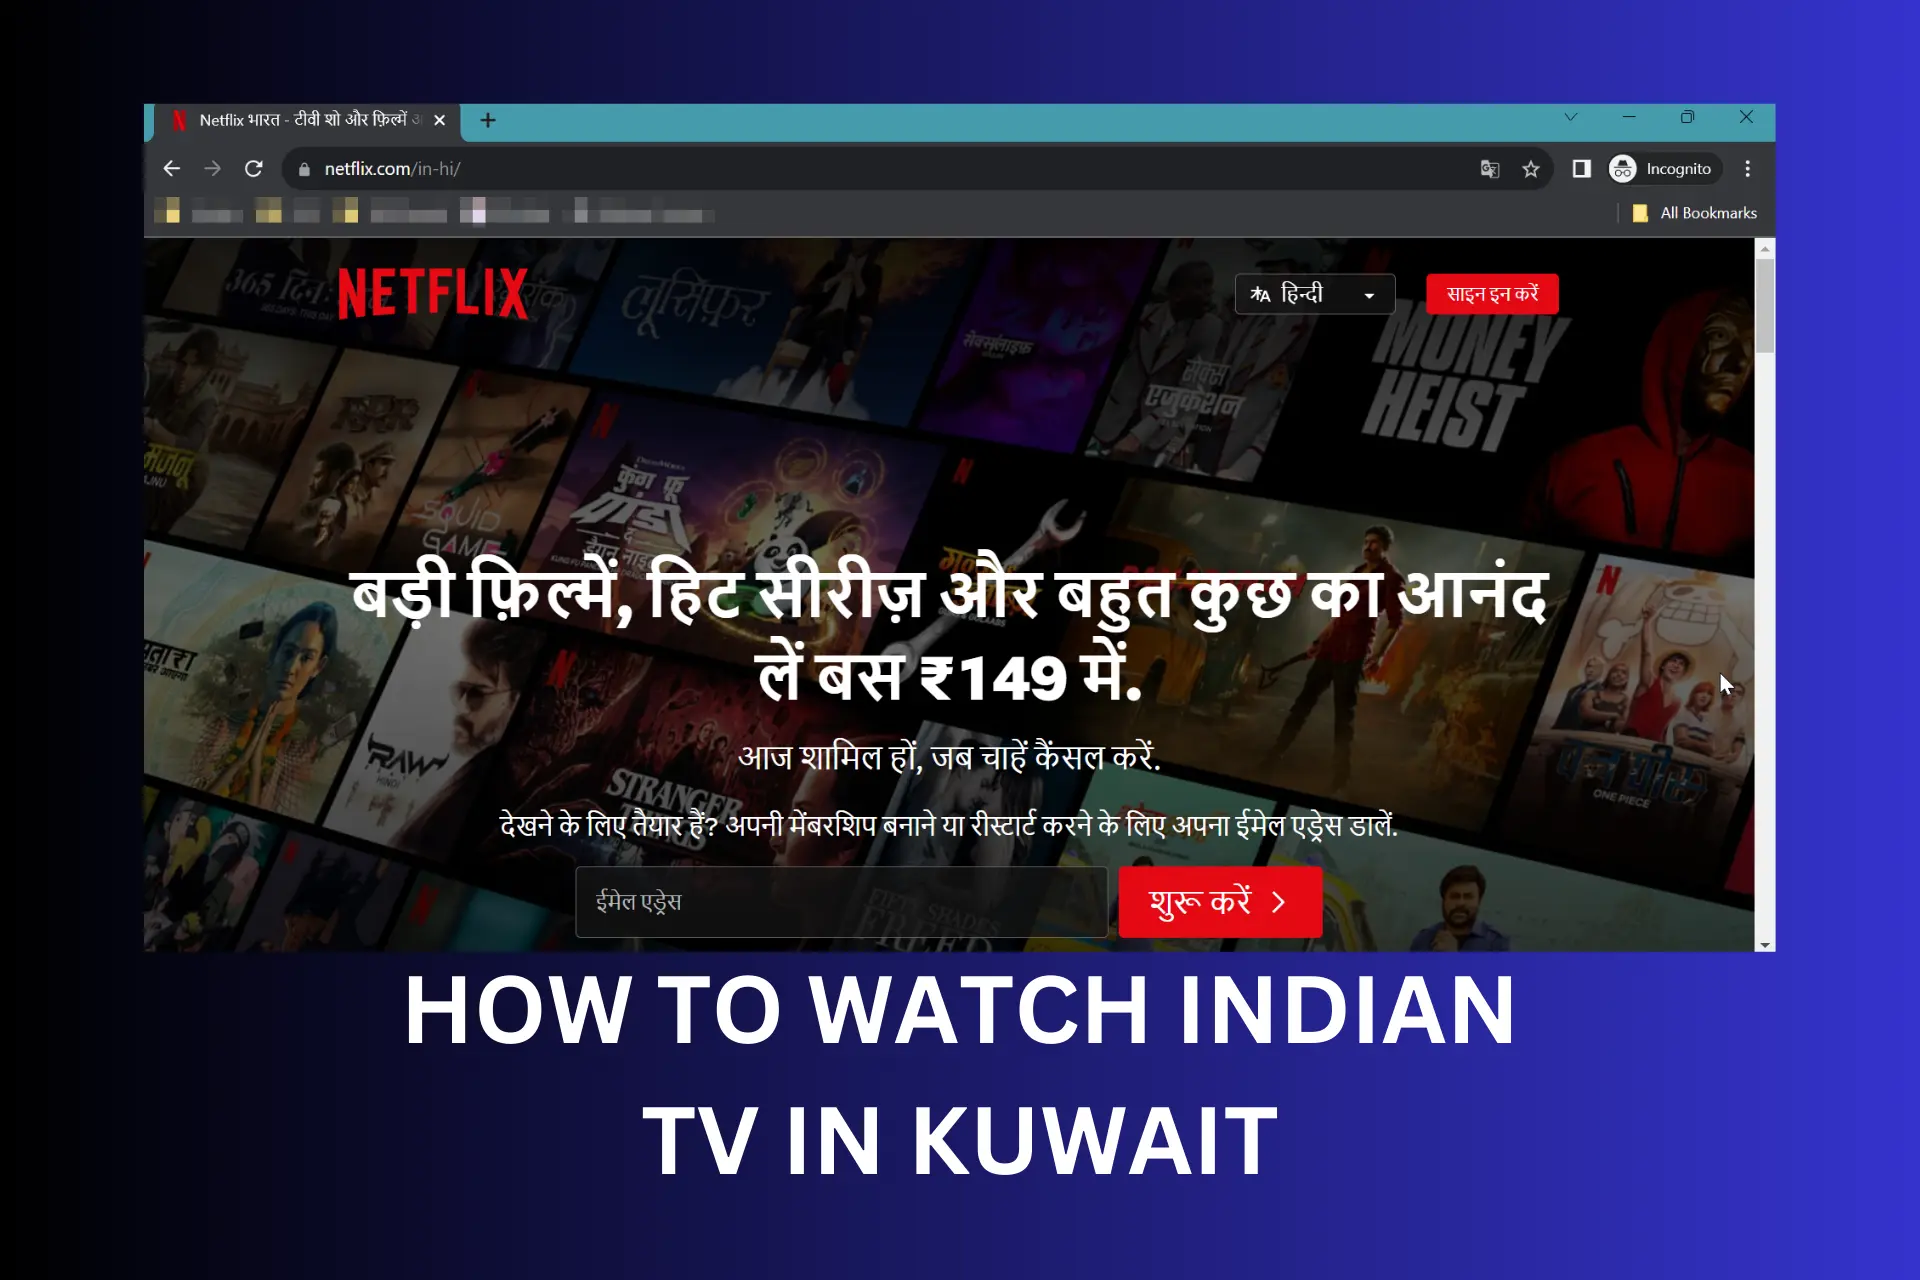 How to Watch Indian Channels in Kuwait [Step-by-Step]